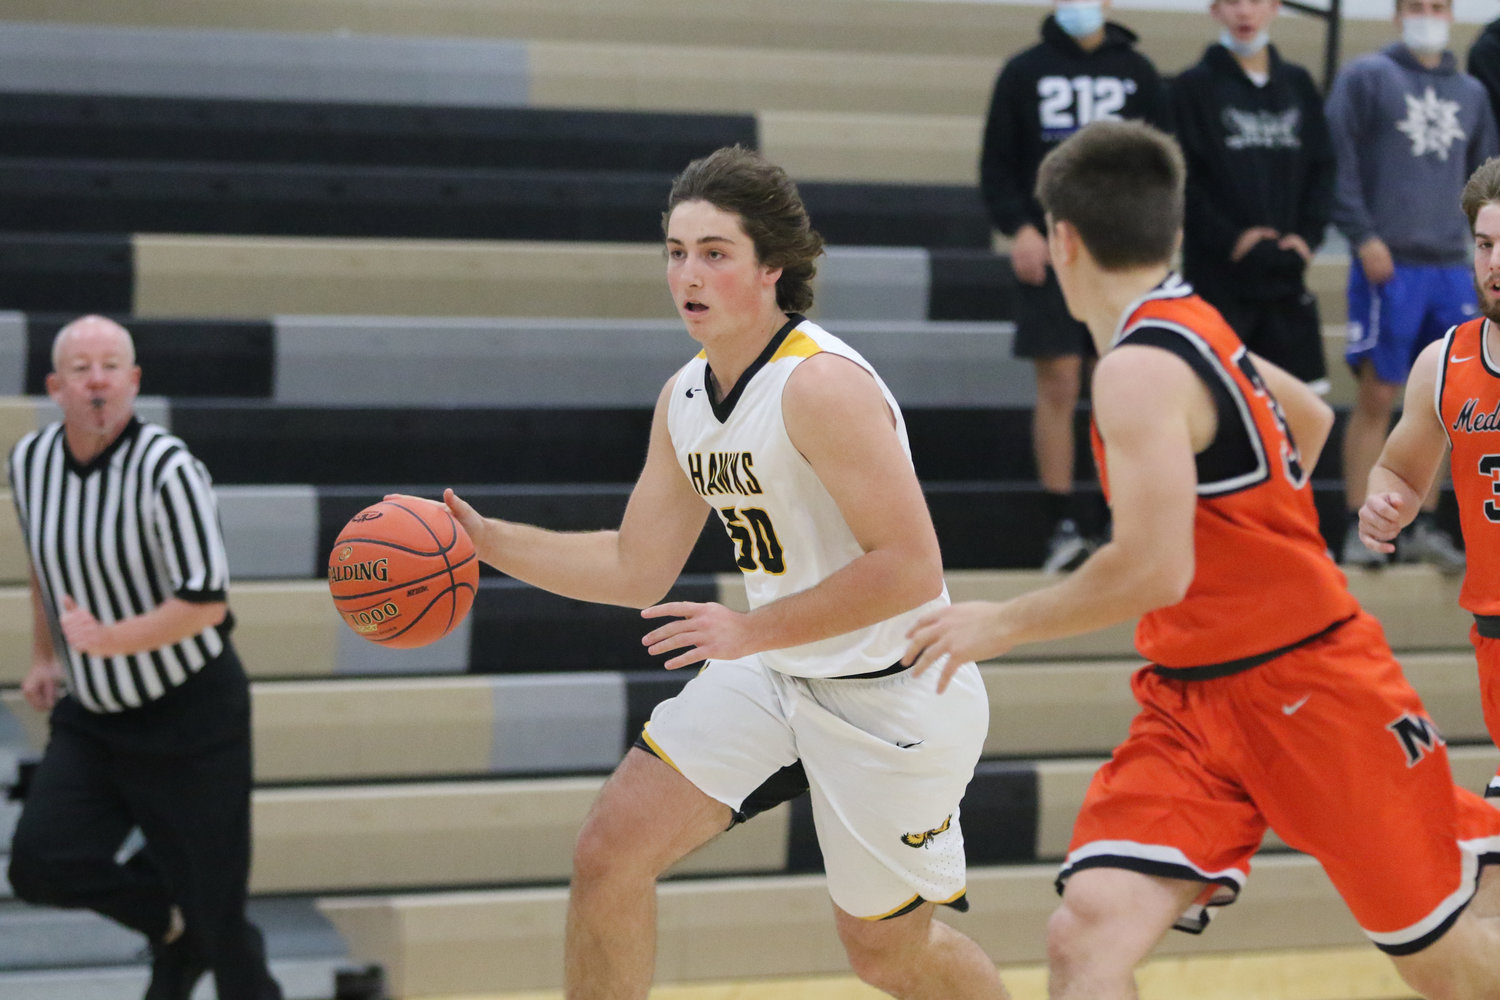 Mid-Prairie forward Aidan Rath leads a fast break during the first quarter of a scrimmage with Mediapolis in Wellman on Saturday, November 21.